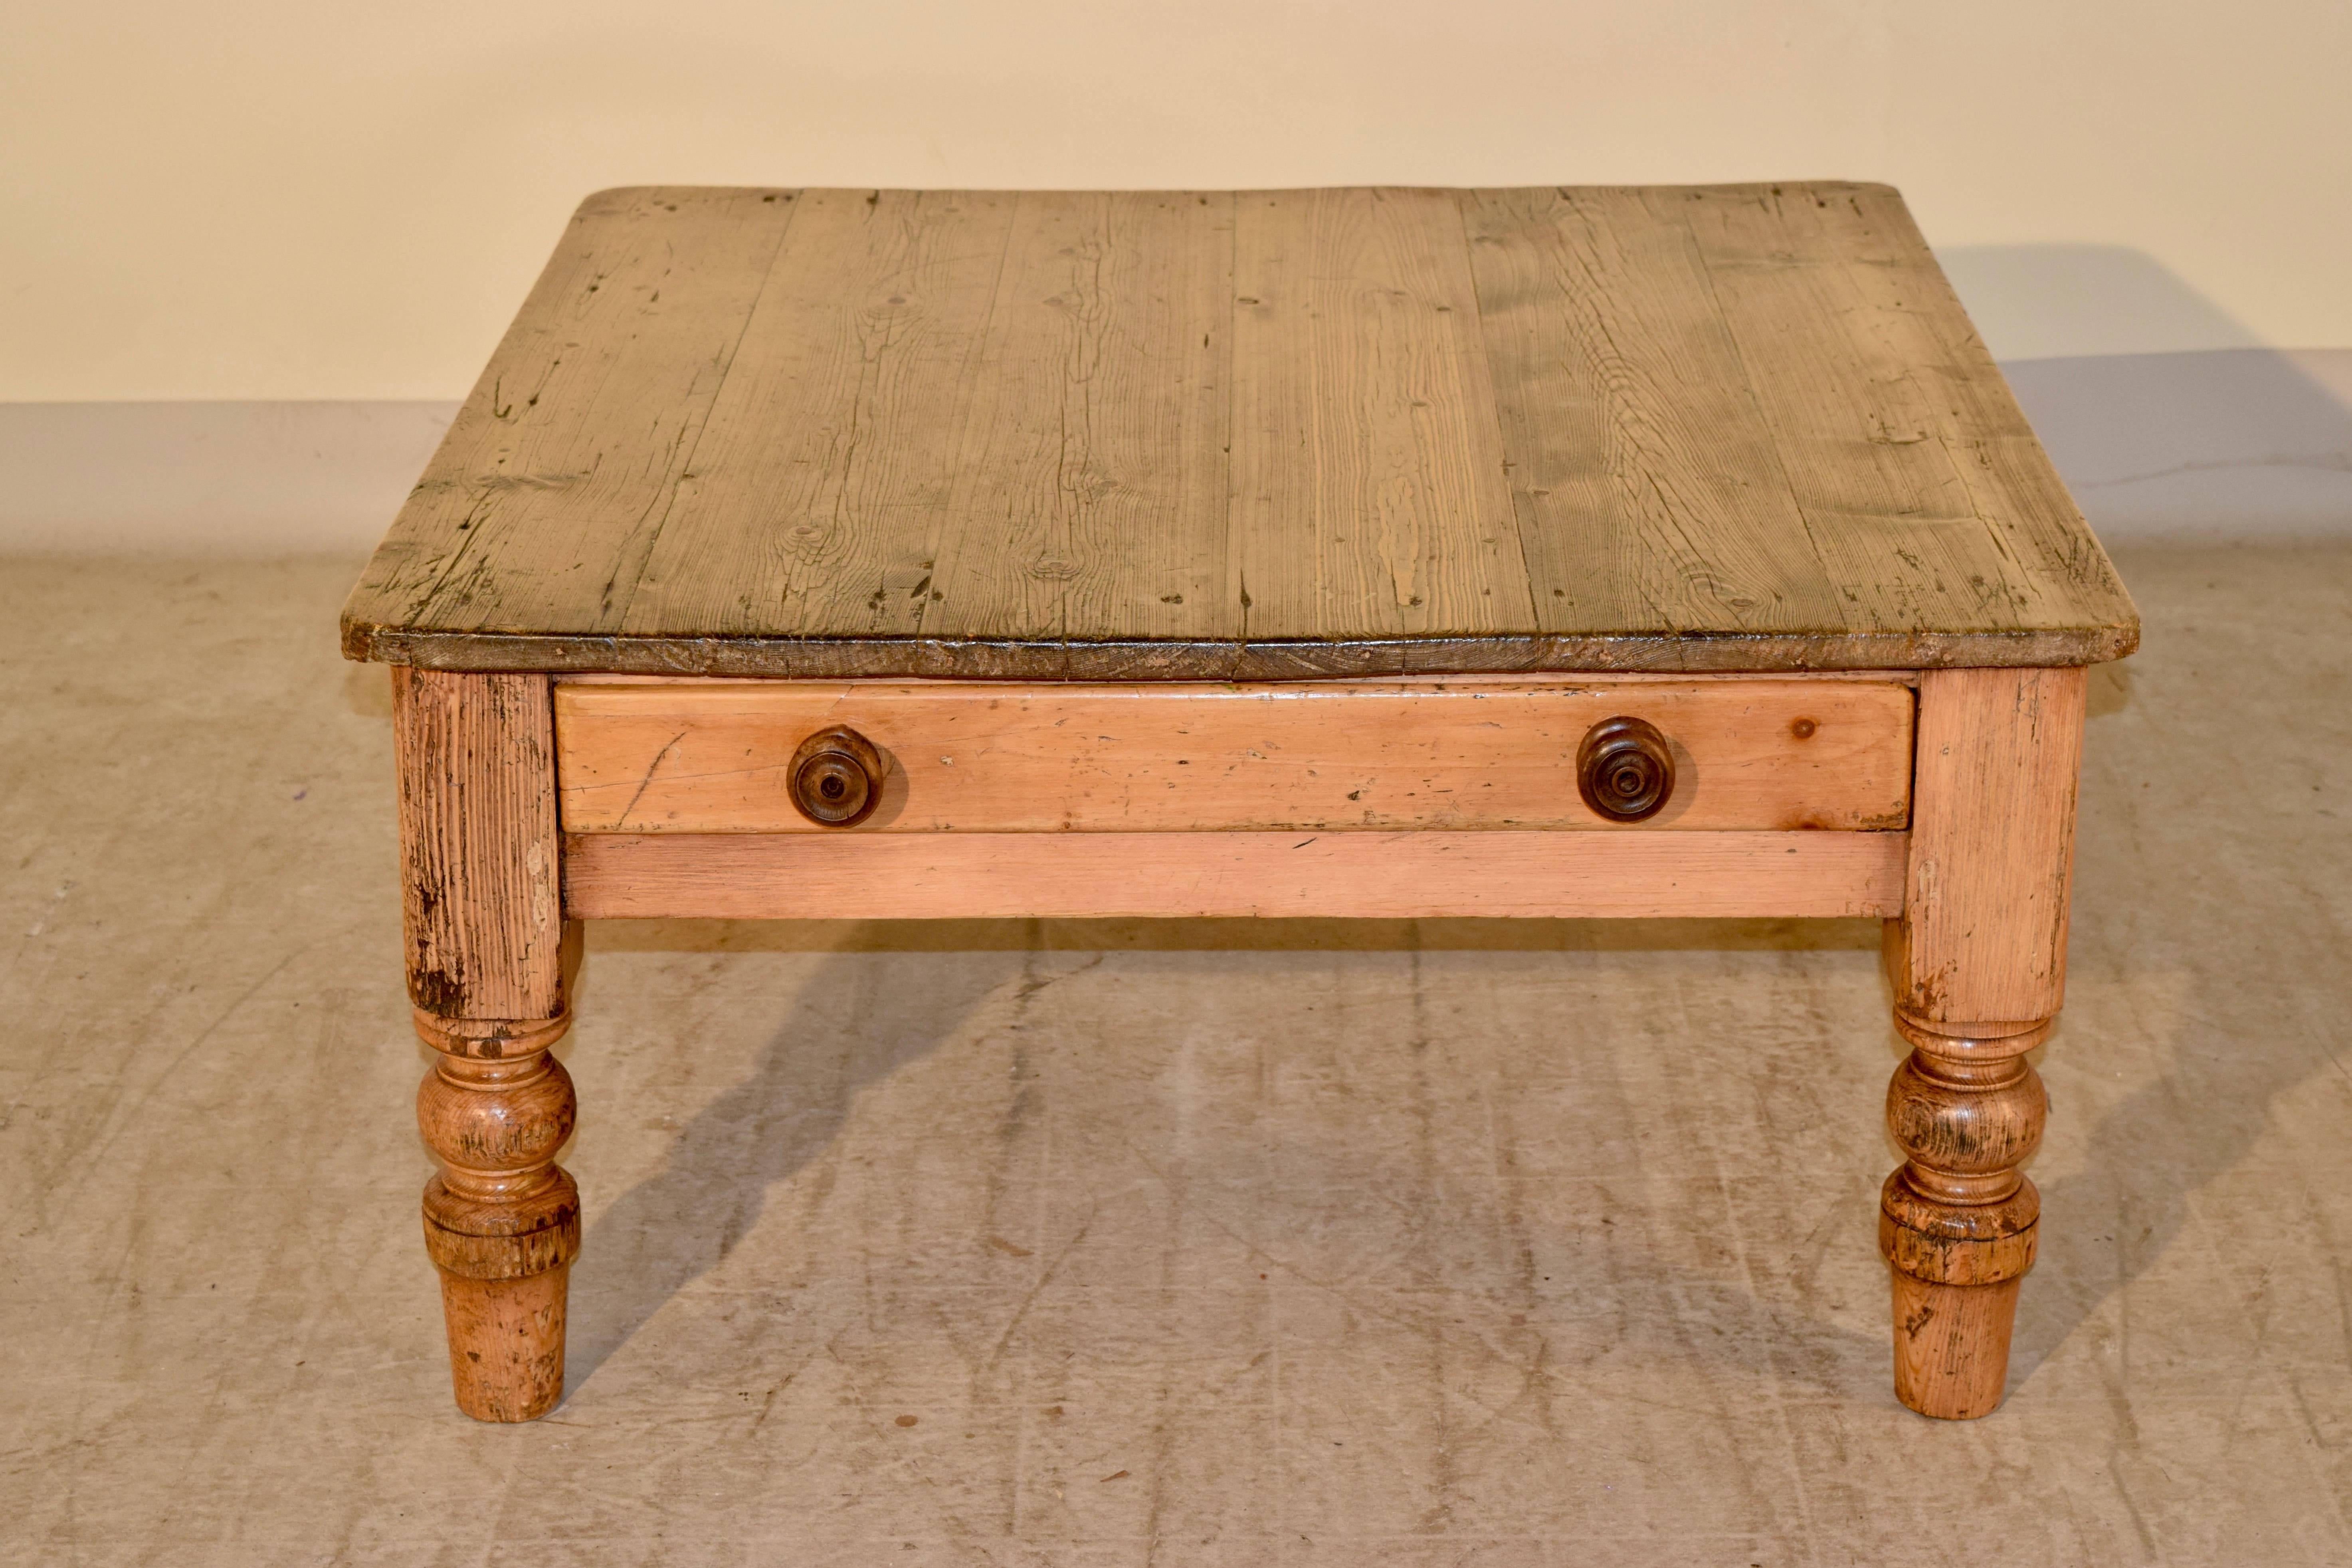 19th century English pine coffee table with a six plank top, which has rounded corners, following down to a single drawer and thickly turned legs.